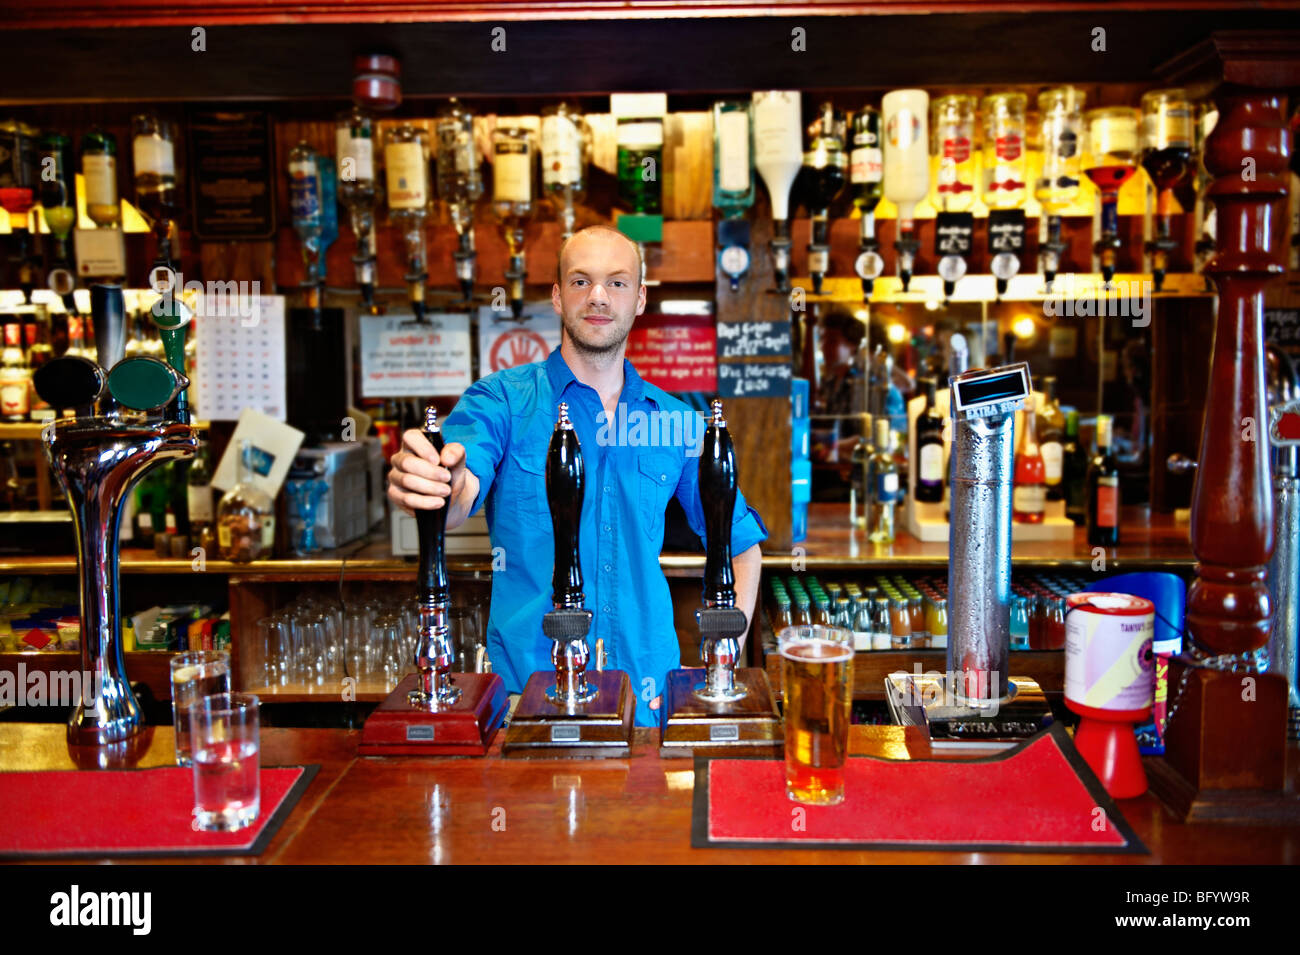 Barman standing behind bar in pub Stock Photo